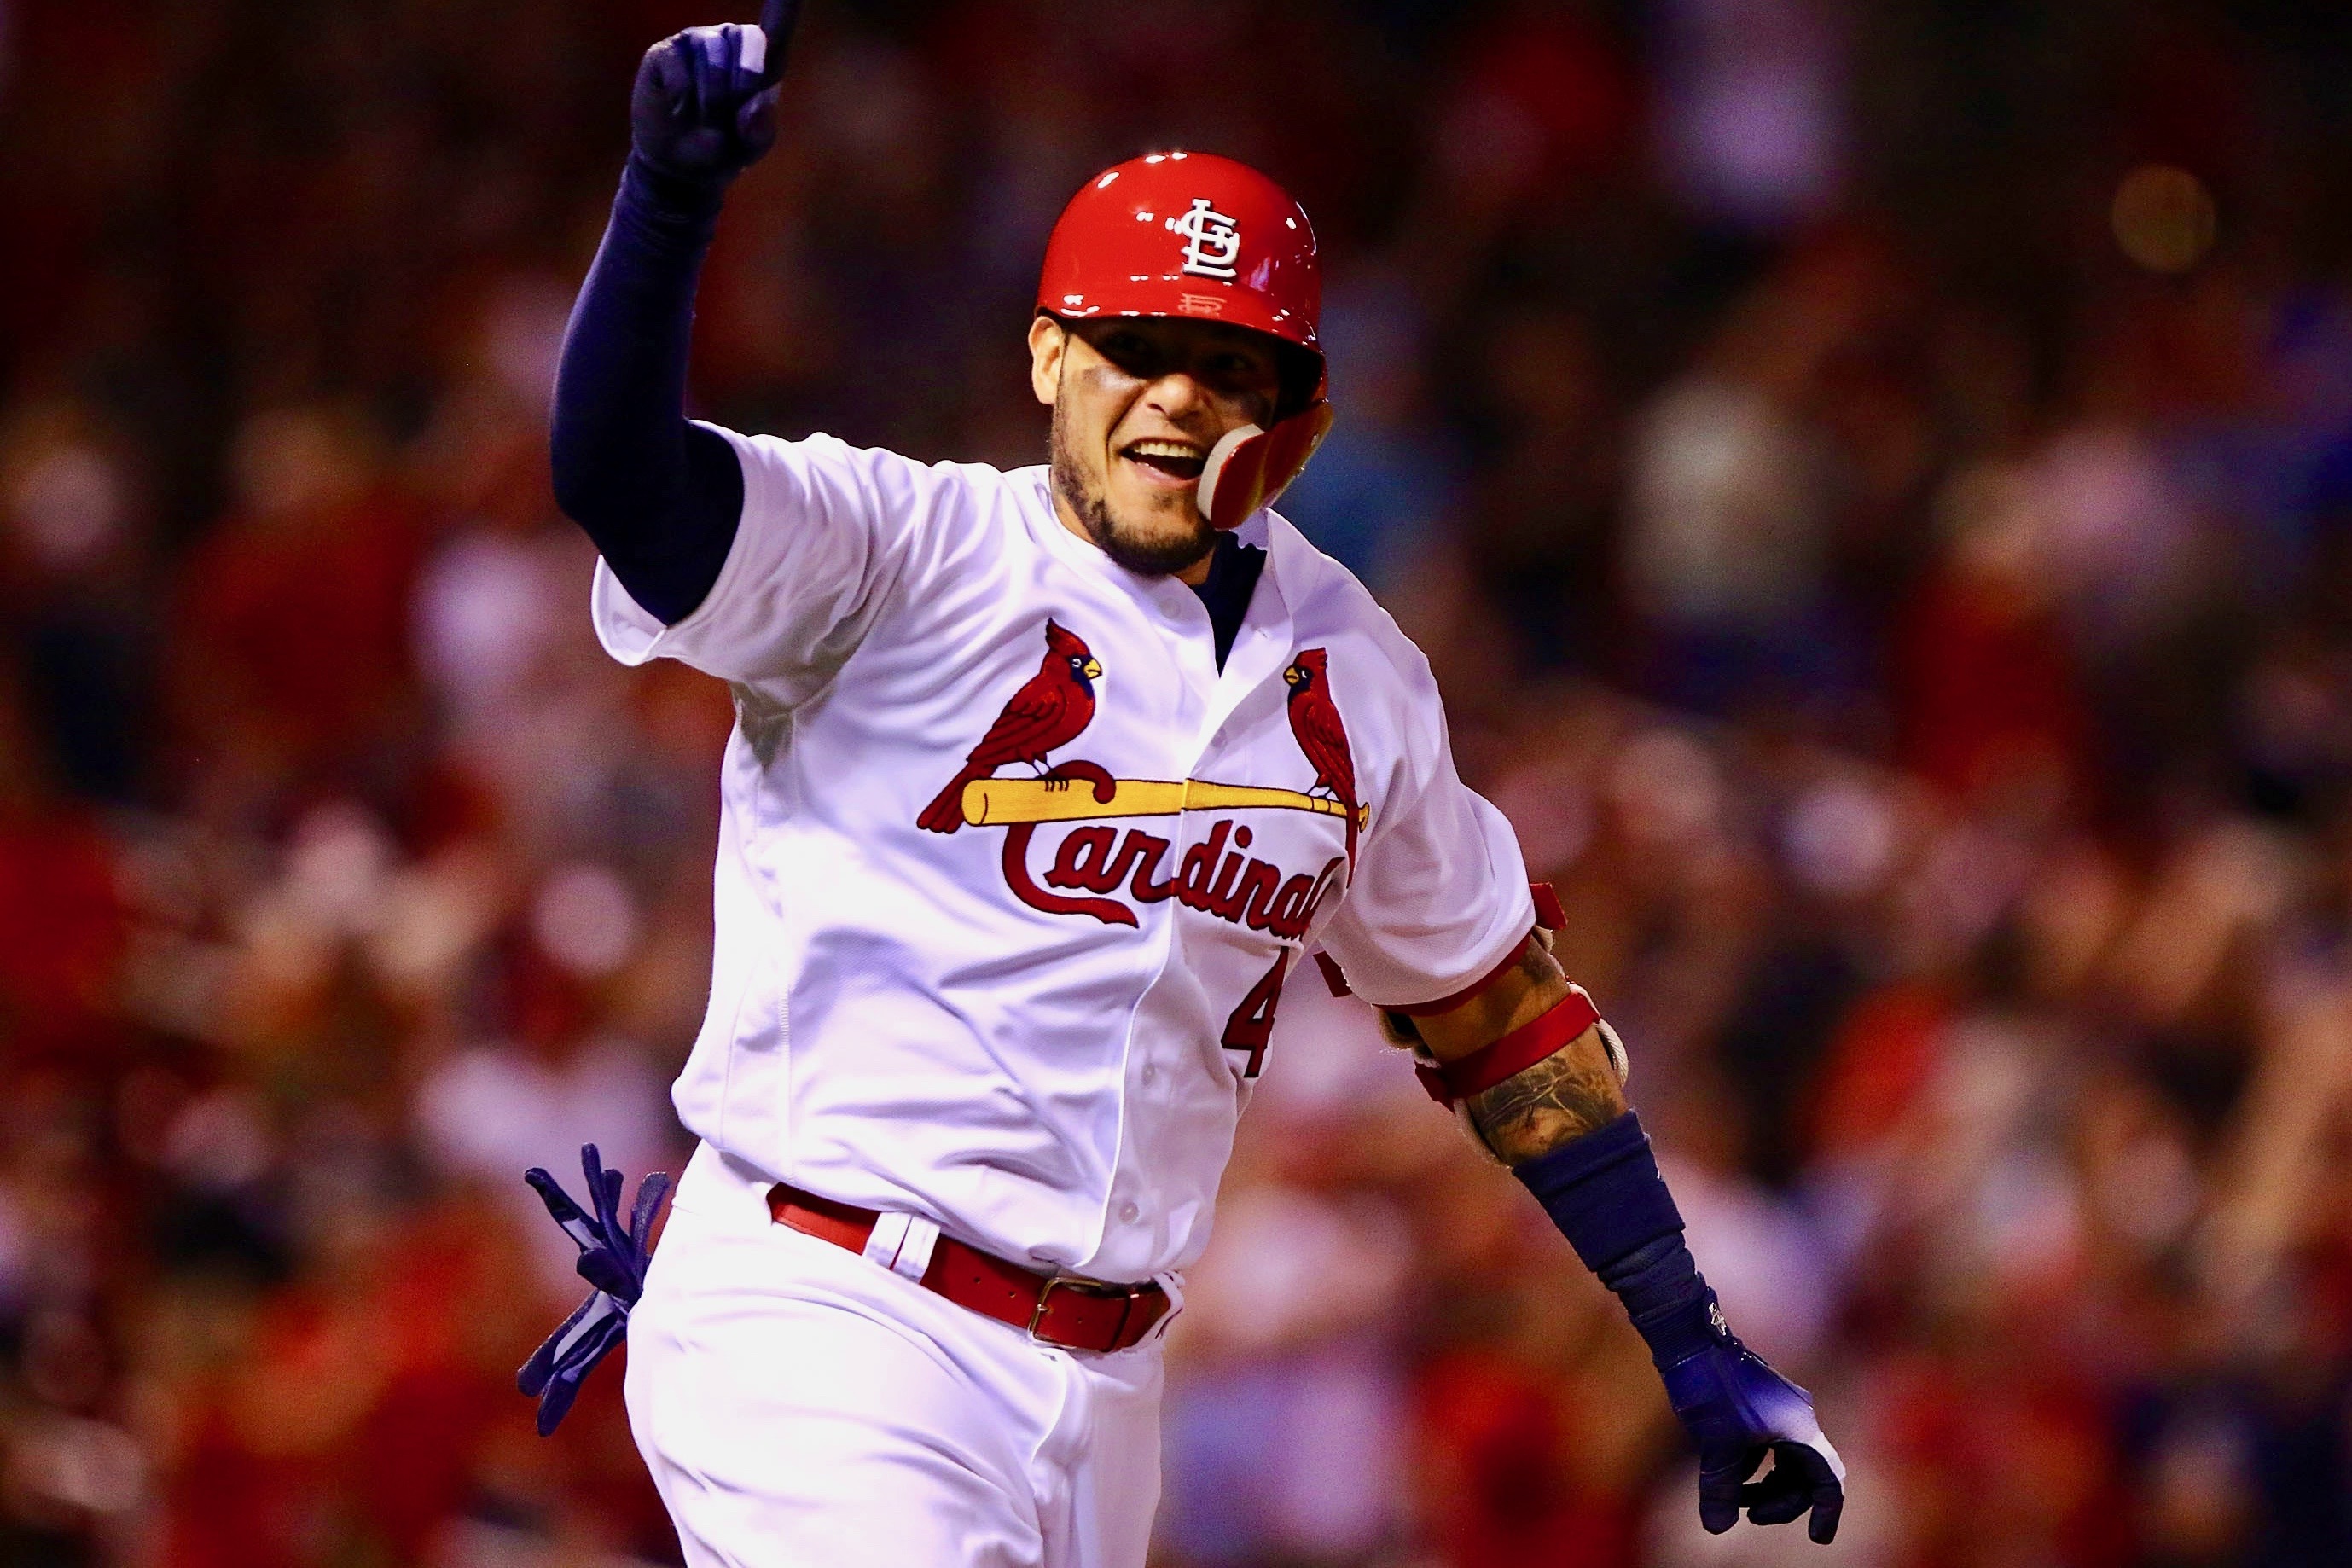 Report: Cardinals sign Yadier Molina to a three-year extension - NBC Sports